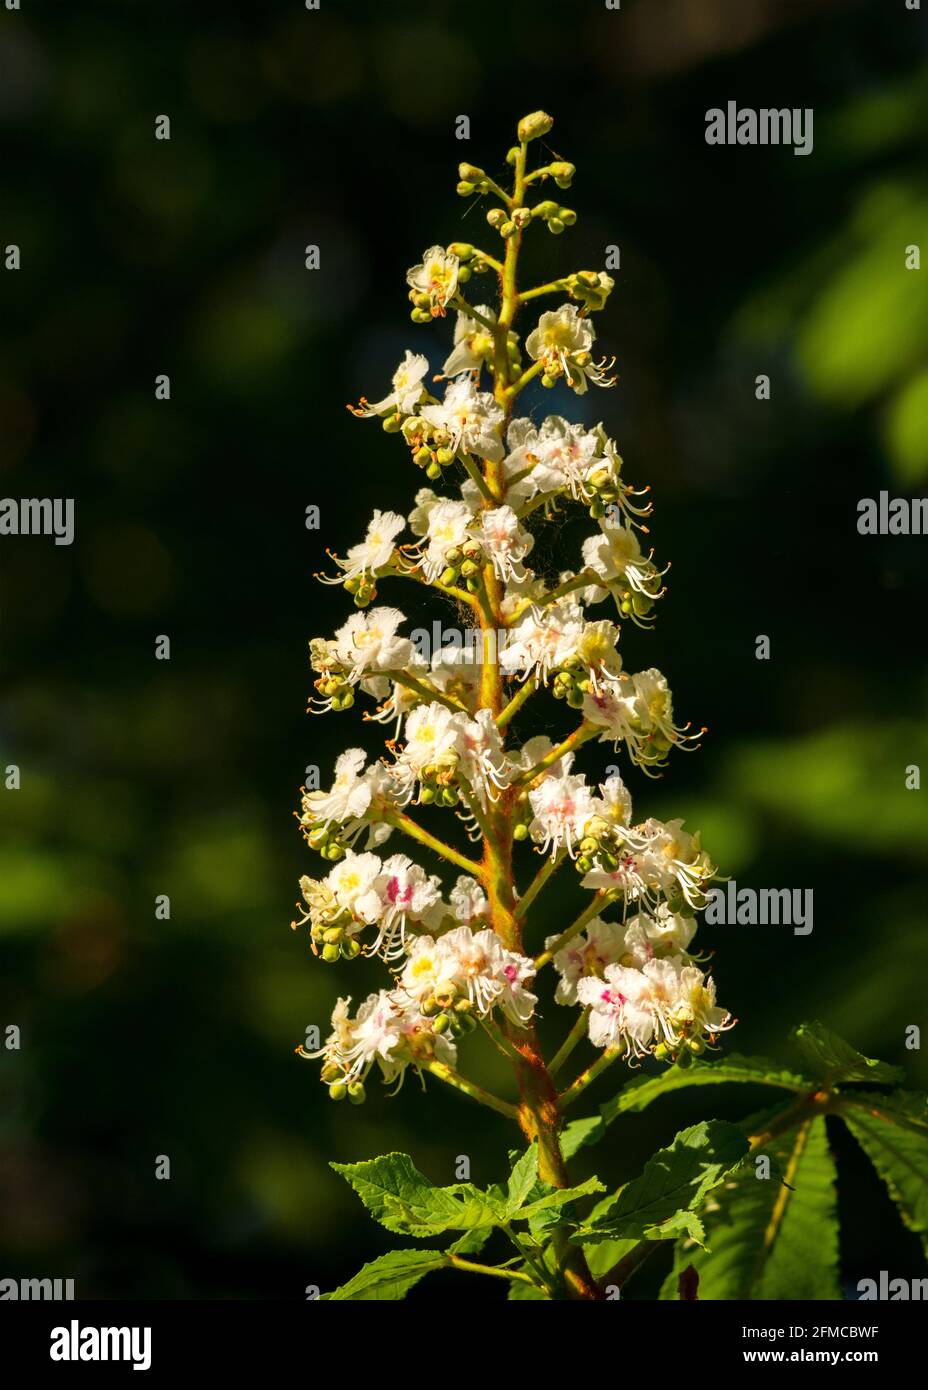 Single European Horse Chestnut or Aesculus Hippocastanum inflorescence or flower blossoms Stock Photo